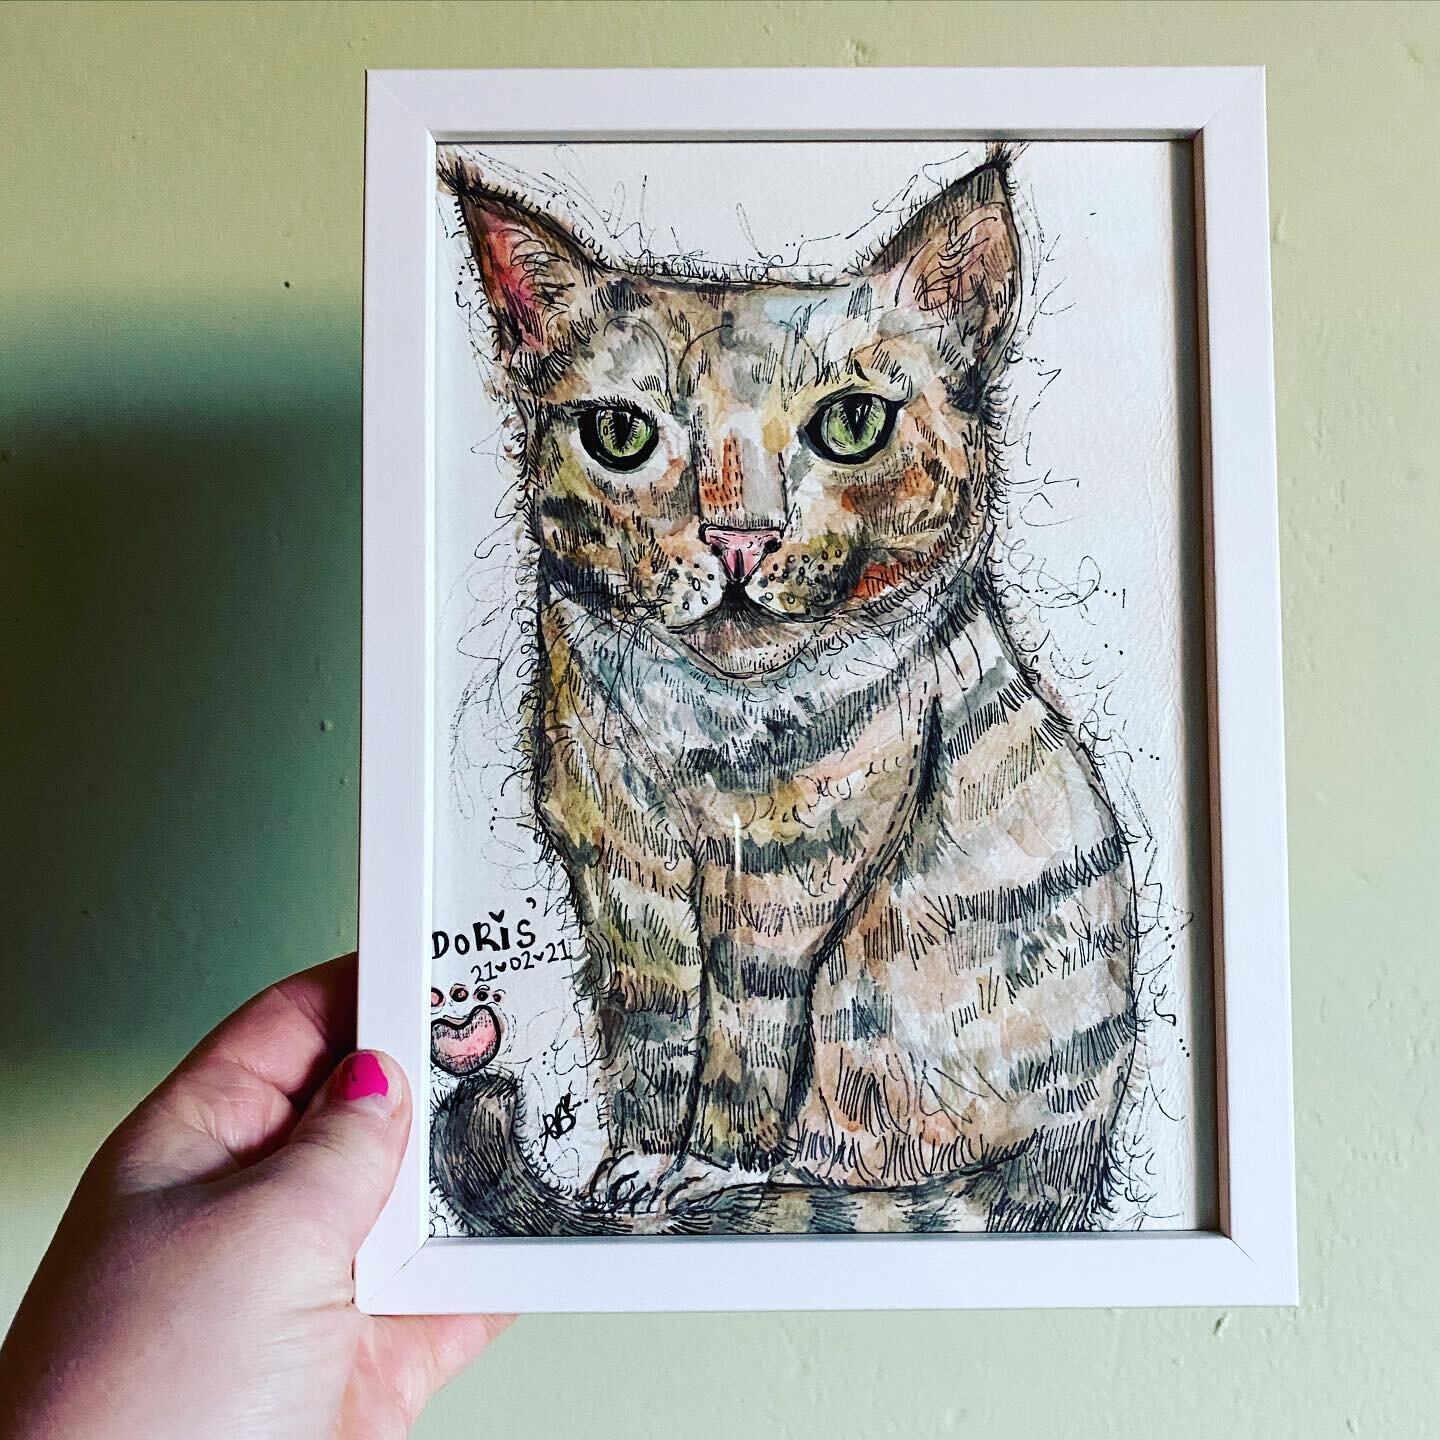 Doris all framed up! 🐱 🐈 🐾... Quirky Pet Portrait. 
.
.
Personal Pet Commissions. 🖌🎨
Inks, Watercolours and Artist Pens 🖊 on A5 Cold Pressed Watercolour Paper. 
#ashebickillustrations #inks #watercolours #artist #illustrator #quirkyanimalseries